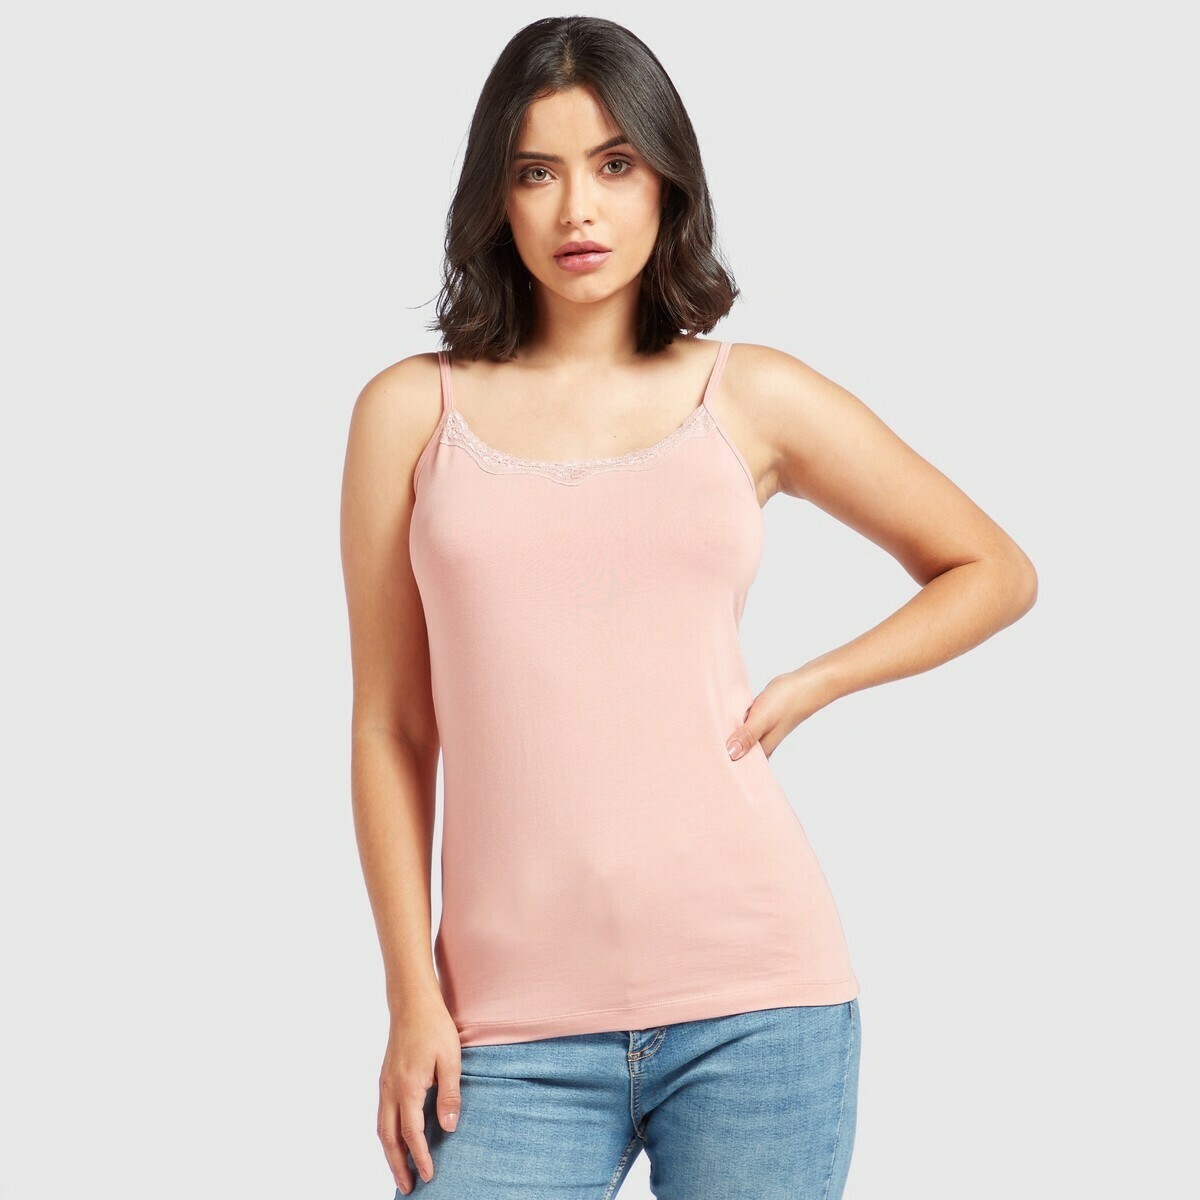 Max - Solid Sleeveless Camisole with Scoop Neck and Lace Detail (Pink)